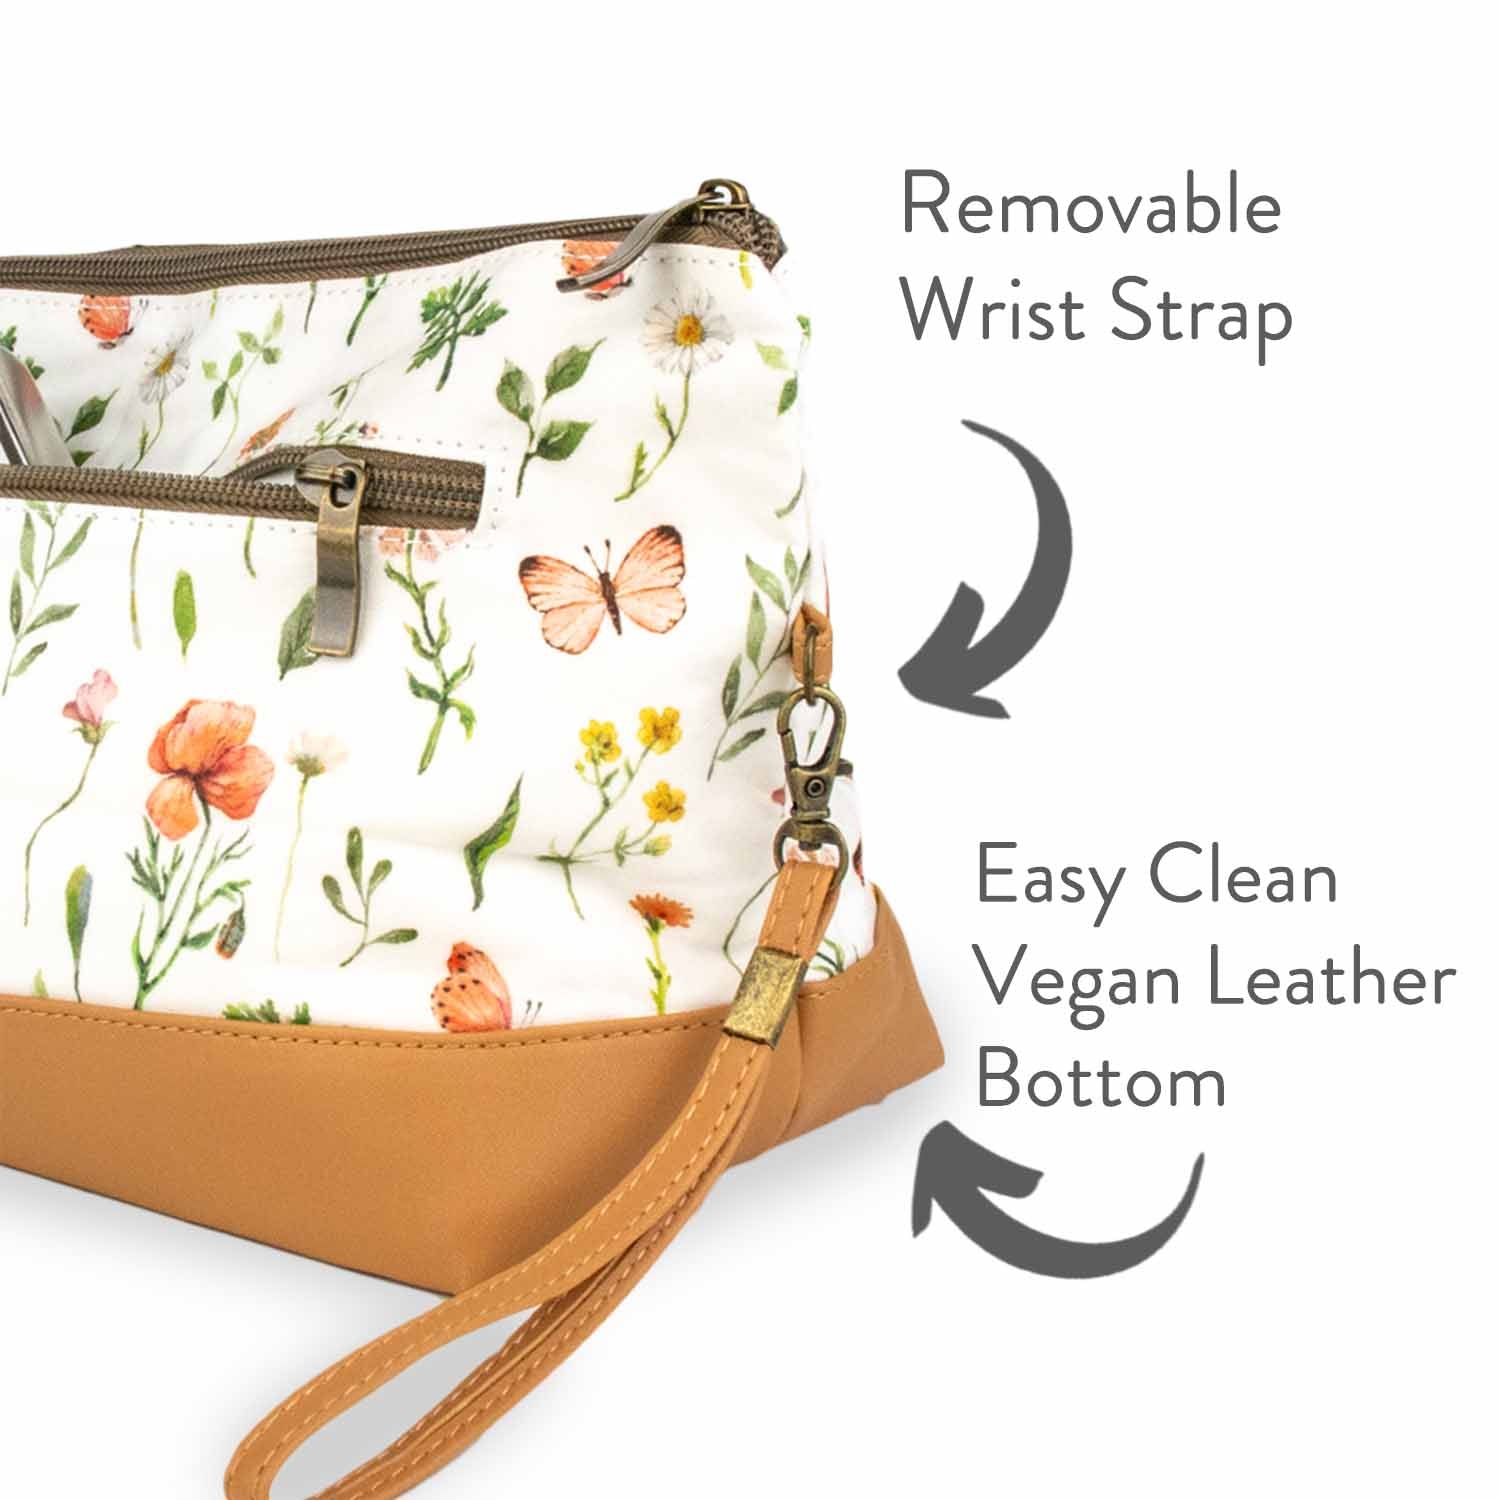 PRE-ORDER - Mountain Meadow Trinity Bag – Small Zippered Knitting Project Bag - Shipping In Early June